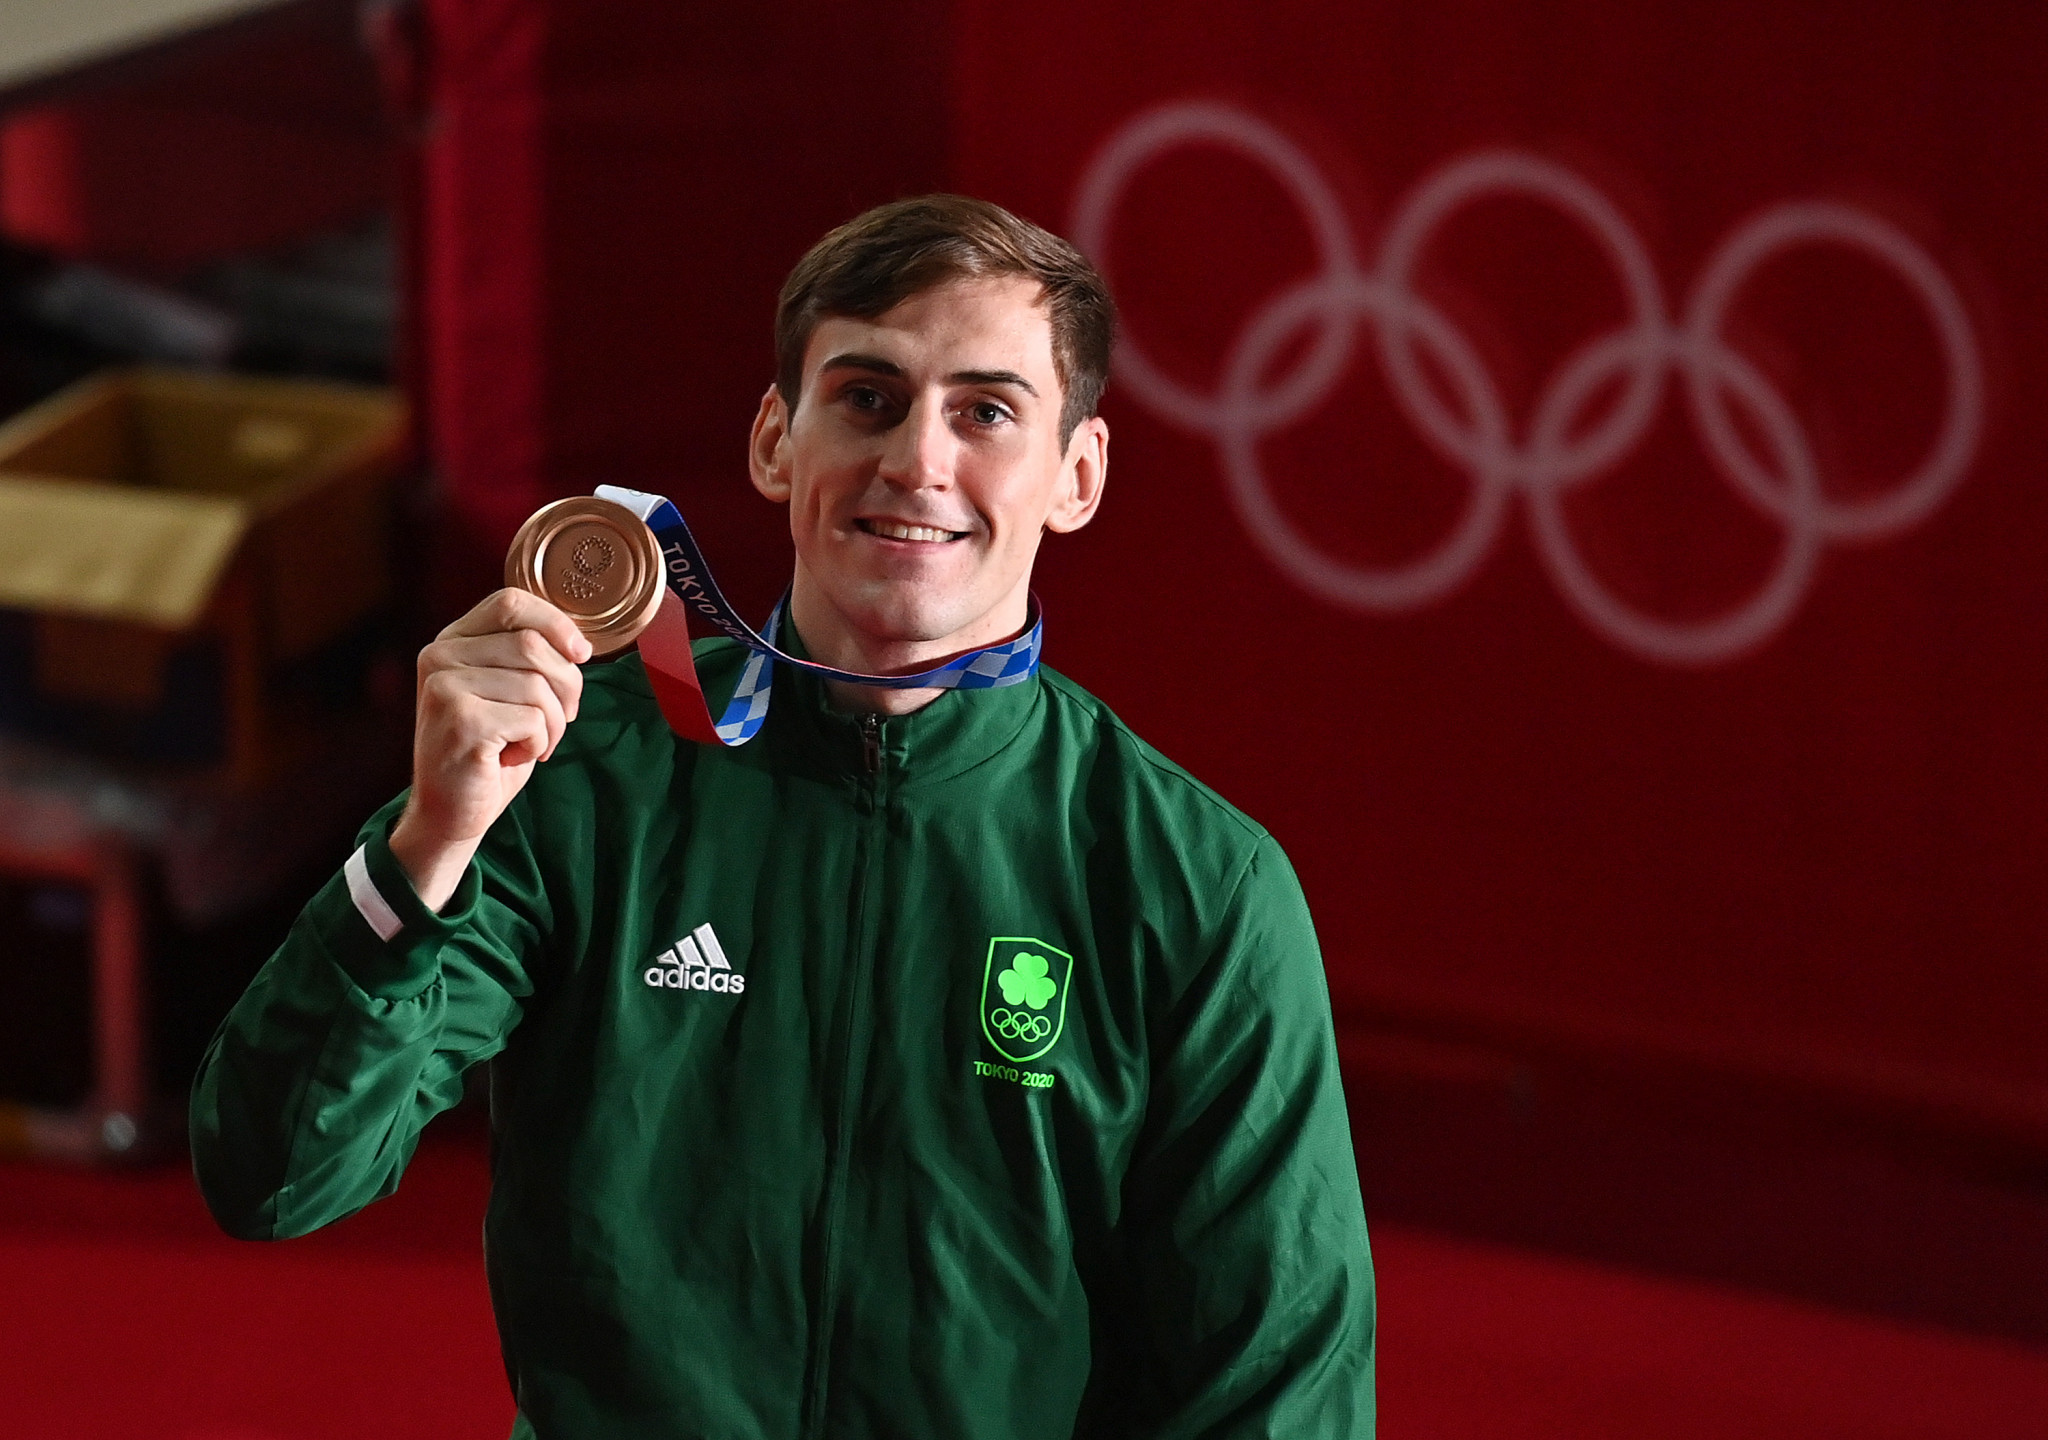 Olympic medallist Walsh named in Northern Ireland boxing team for Birmingham 2022